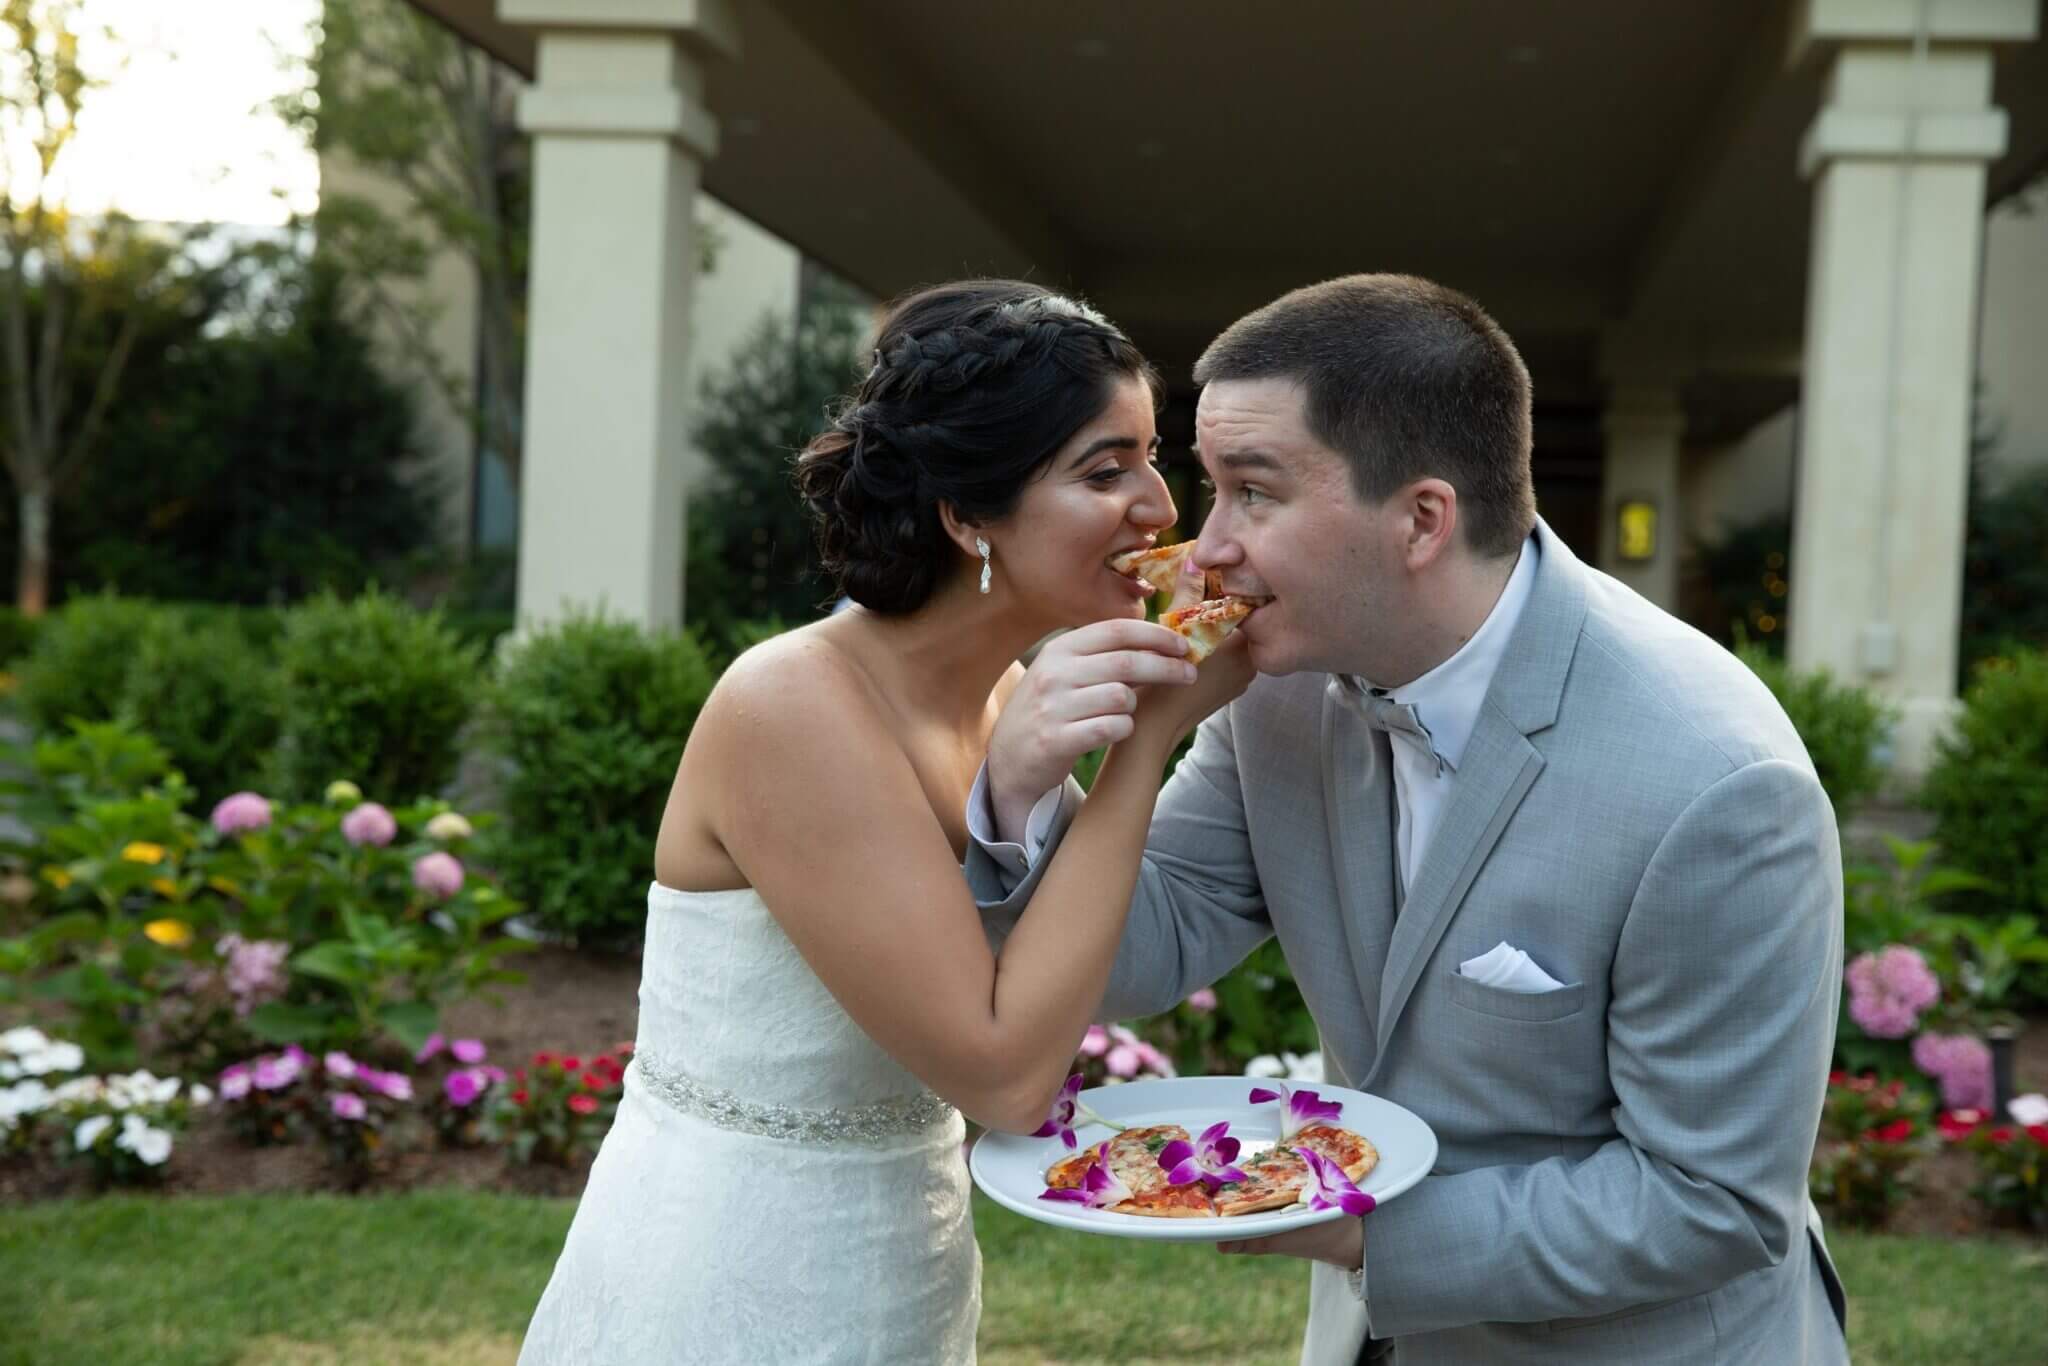 Bride and Groom feeding each other at an outdoor wedding reception in northern New Jersey